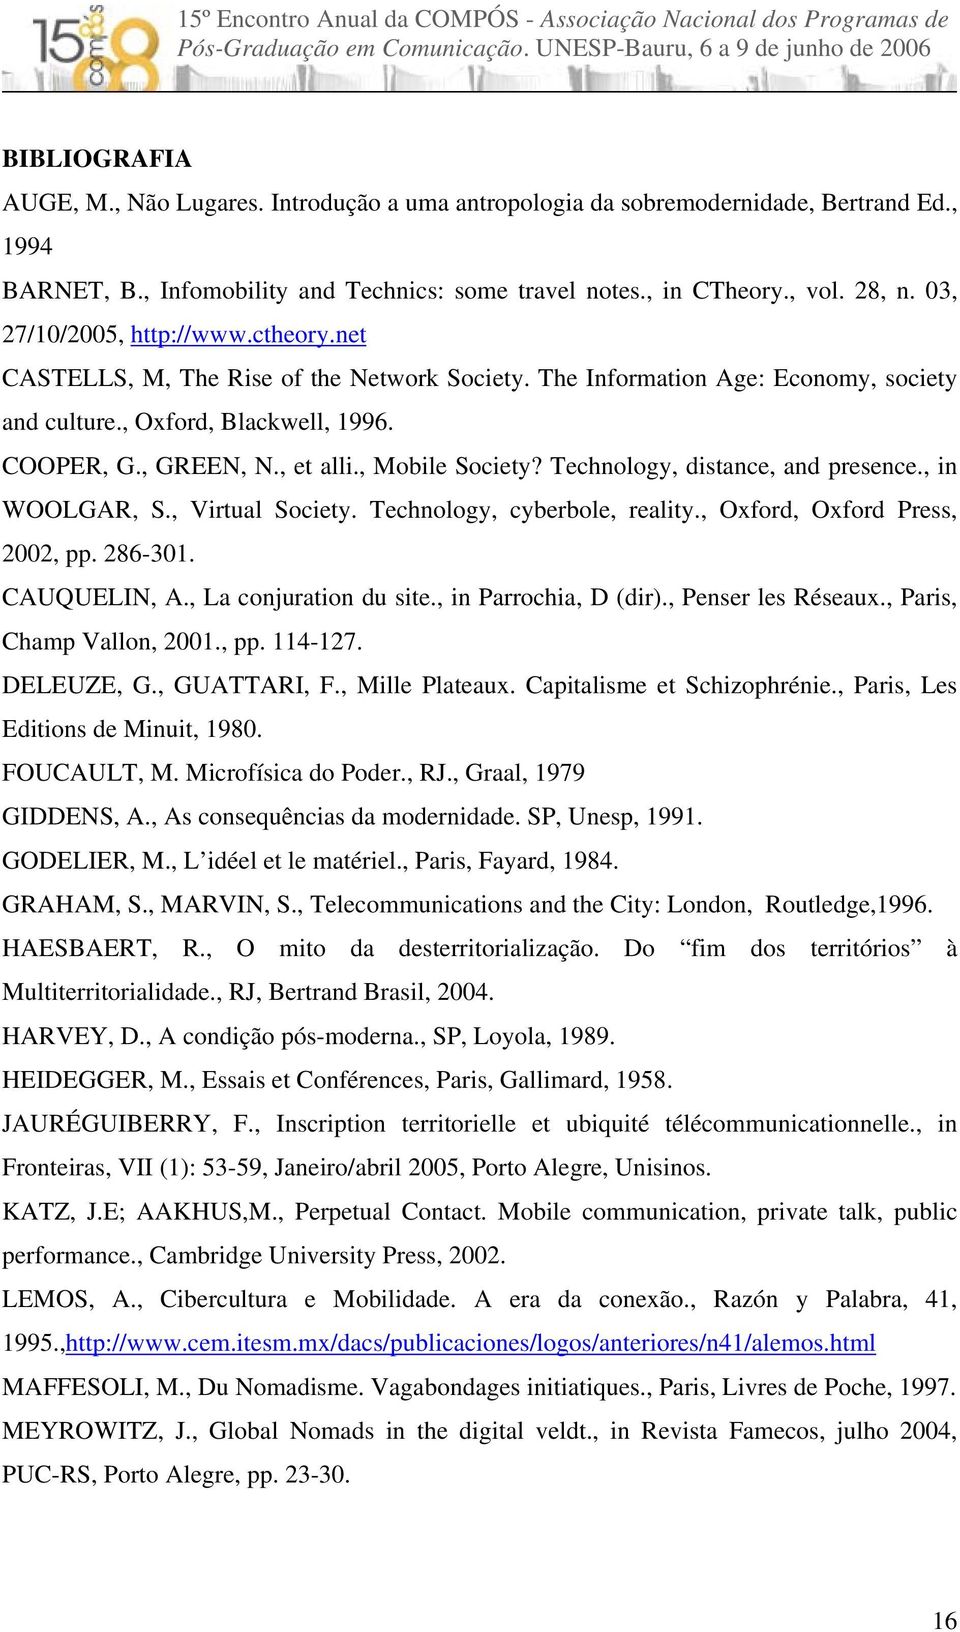 , Mobile Society? Technology, distance, and presence., in WOOLGAR, S., Virtual Society. Technology, cyberbole, reality., Oxford, Oxford Press, 2002, pp. 286-301. CAUQUELIN, A., La conjuration du site.